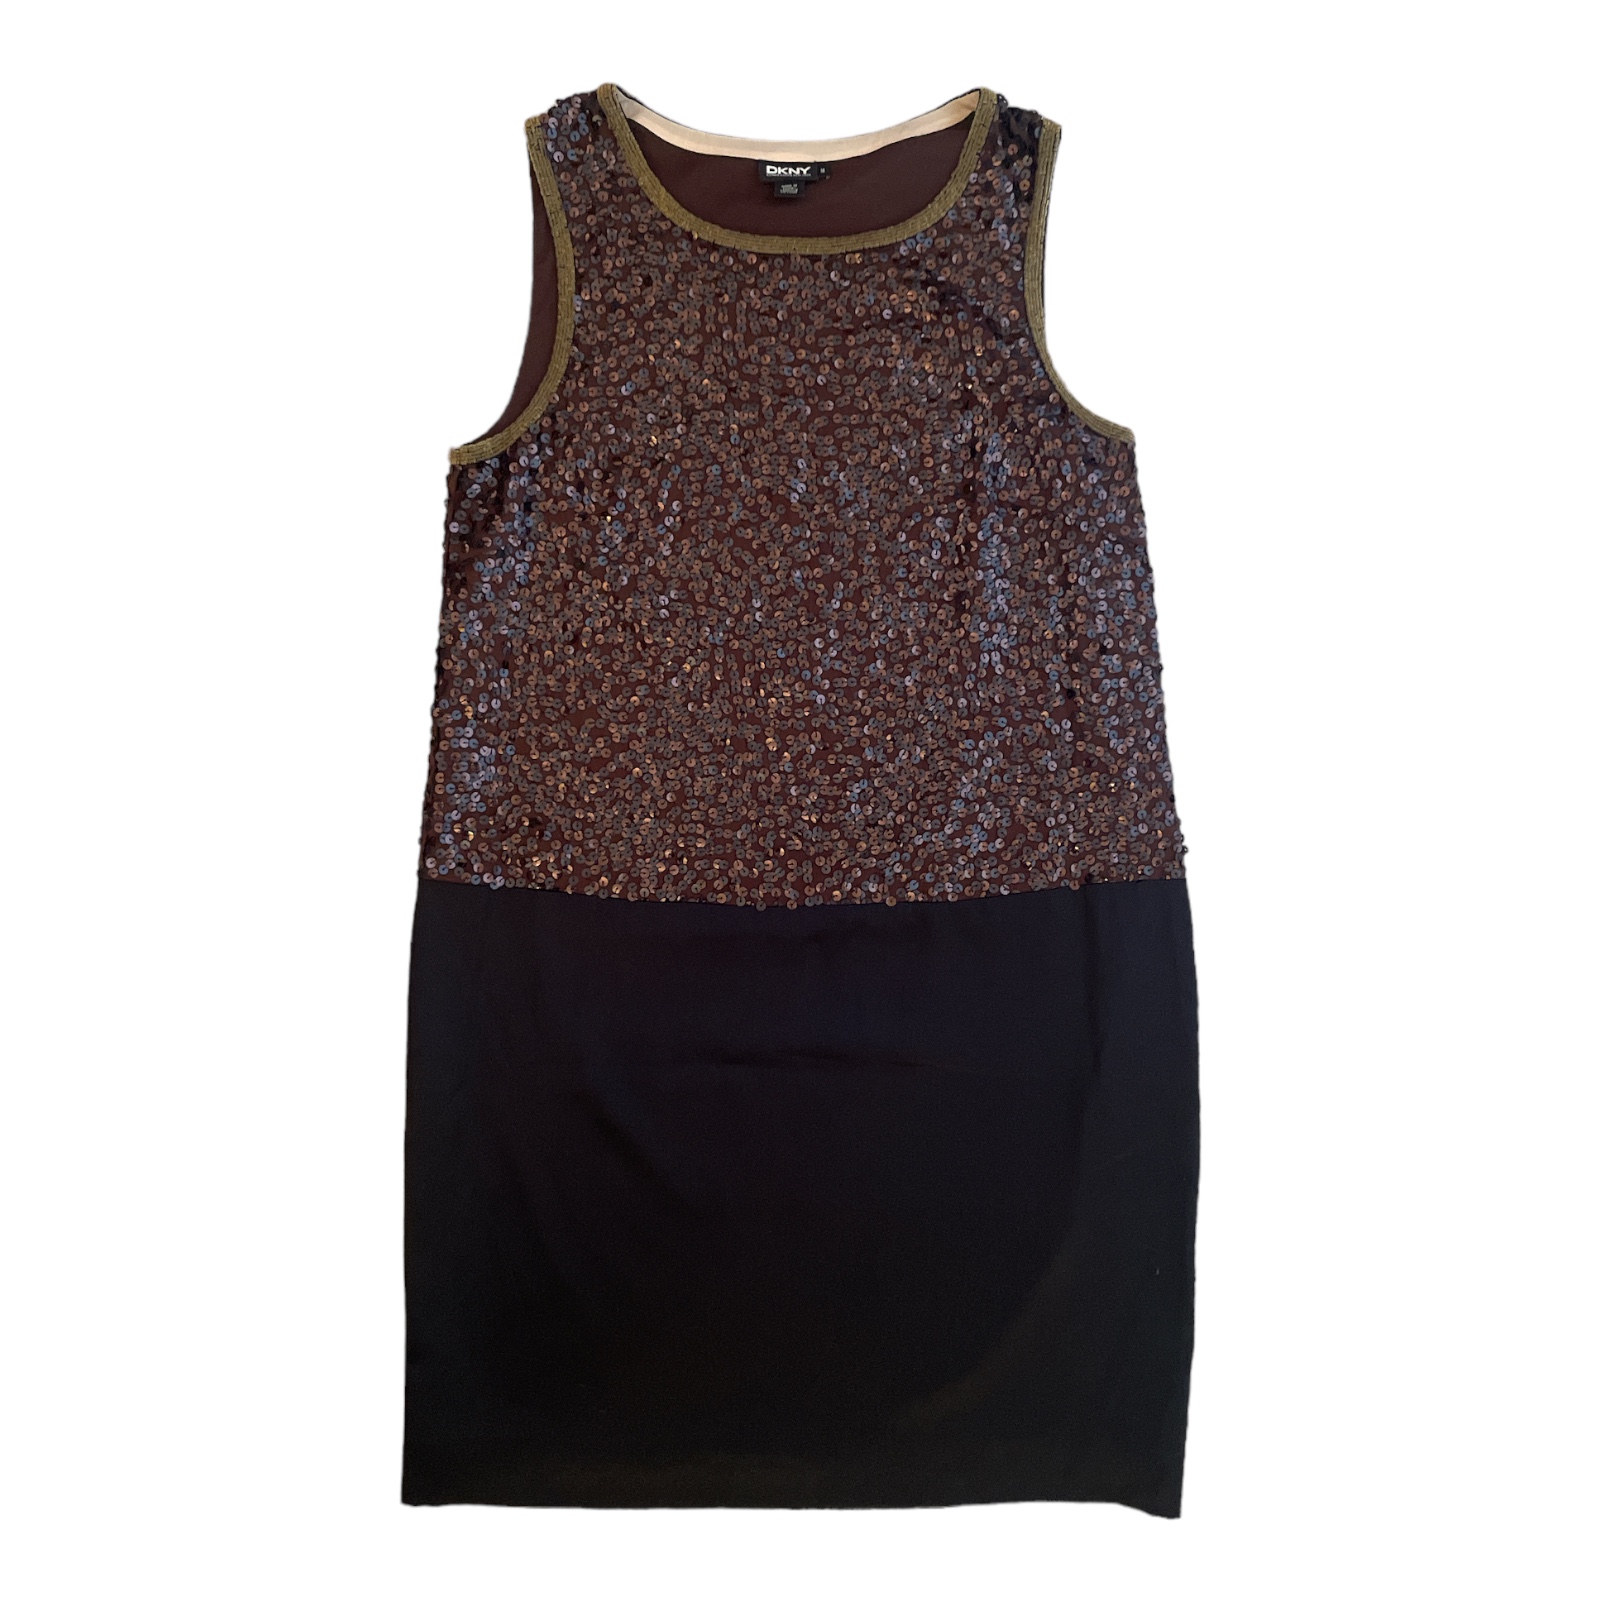 DKNY_Black_And_Brown_Sequin_Dress-Front